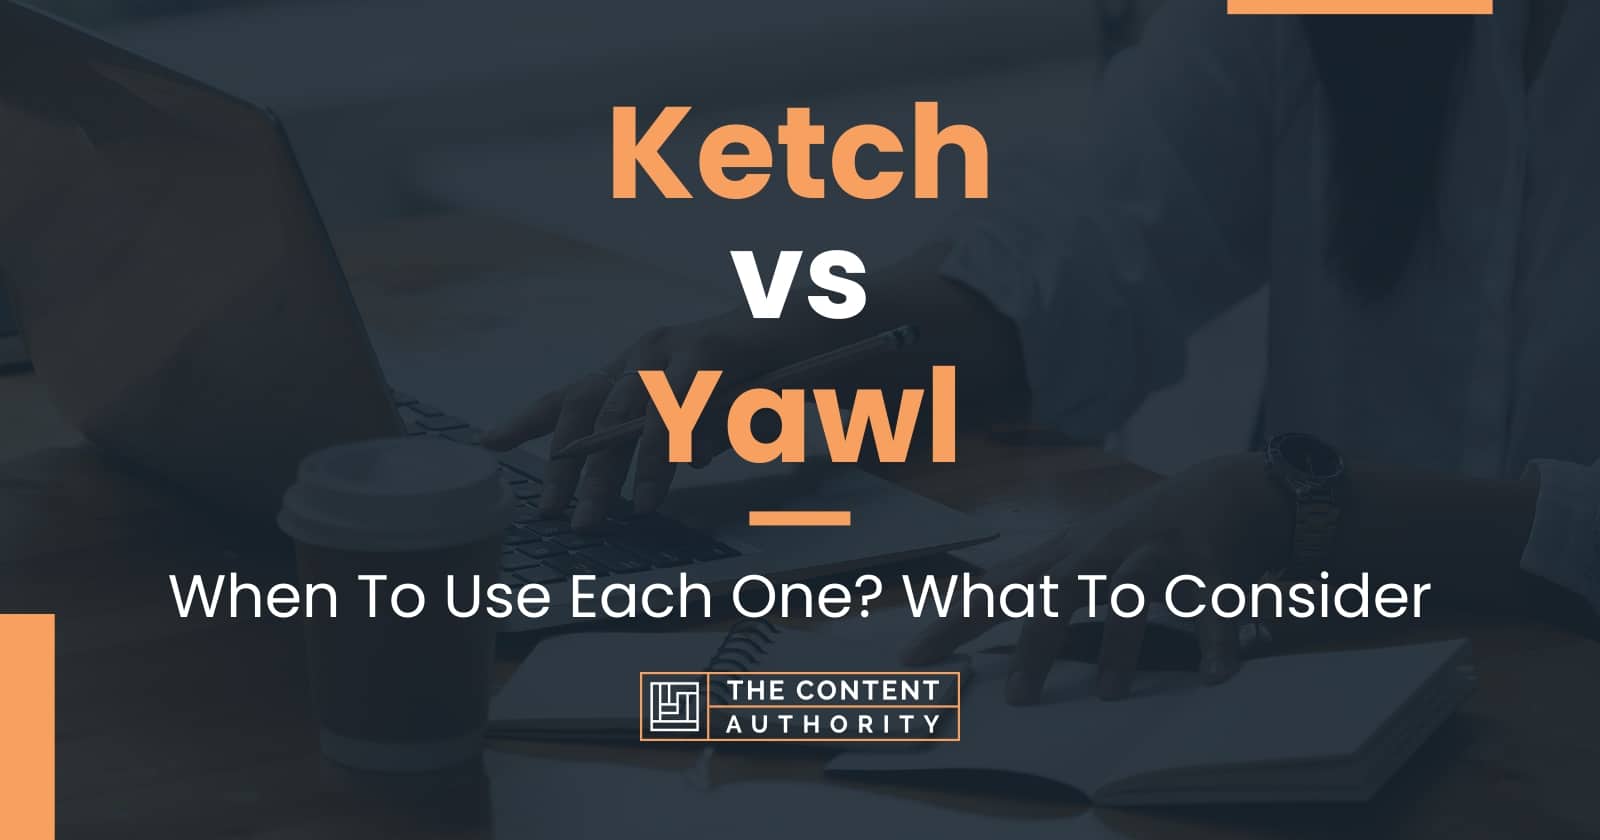 Ketch vs Yawl: When To Use Each One? What To Consider